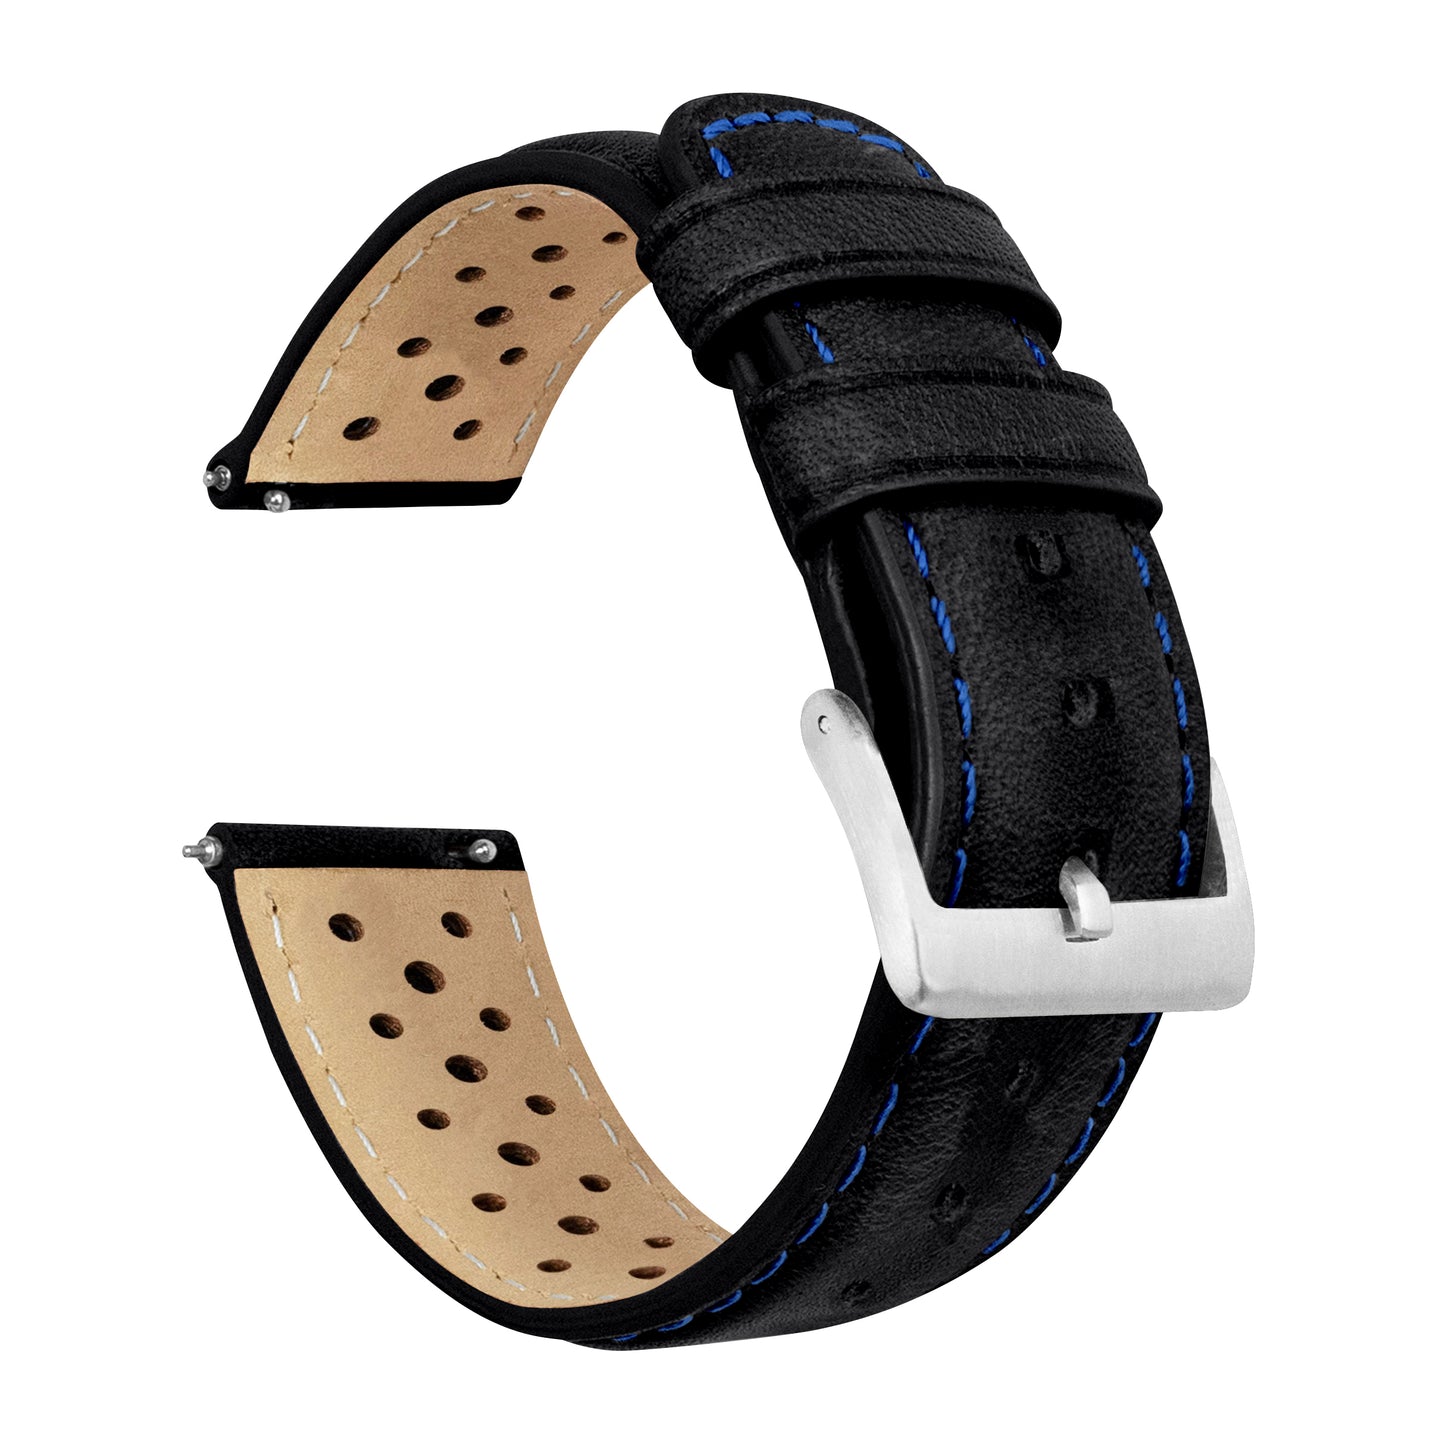 Samsung Galaxy Watch Active Racing Horween Leather Black Blue Stitch Watch Band